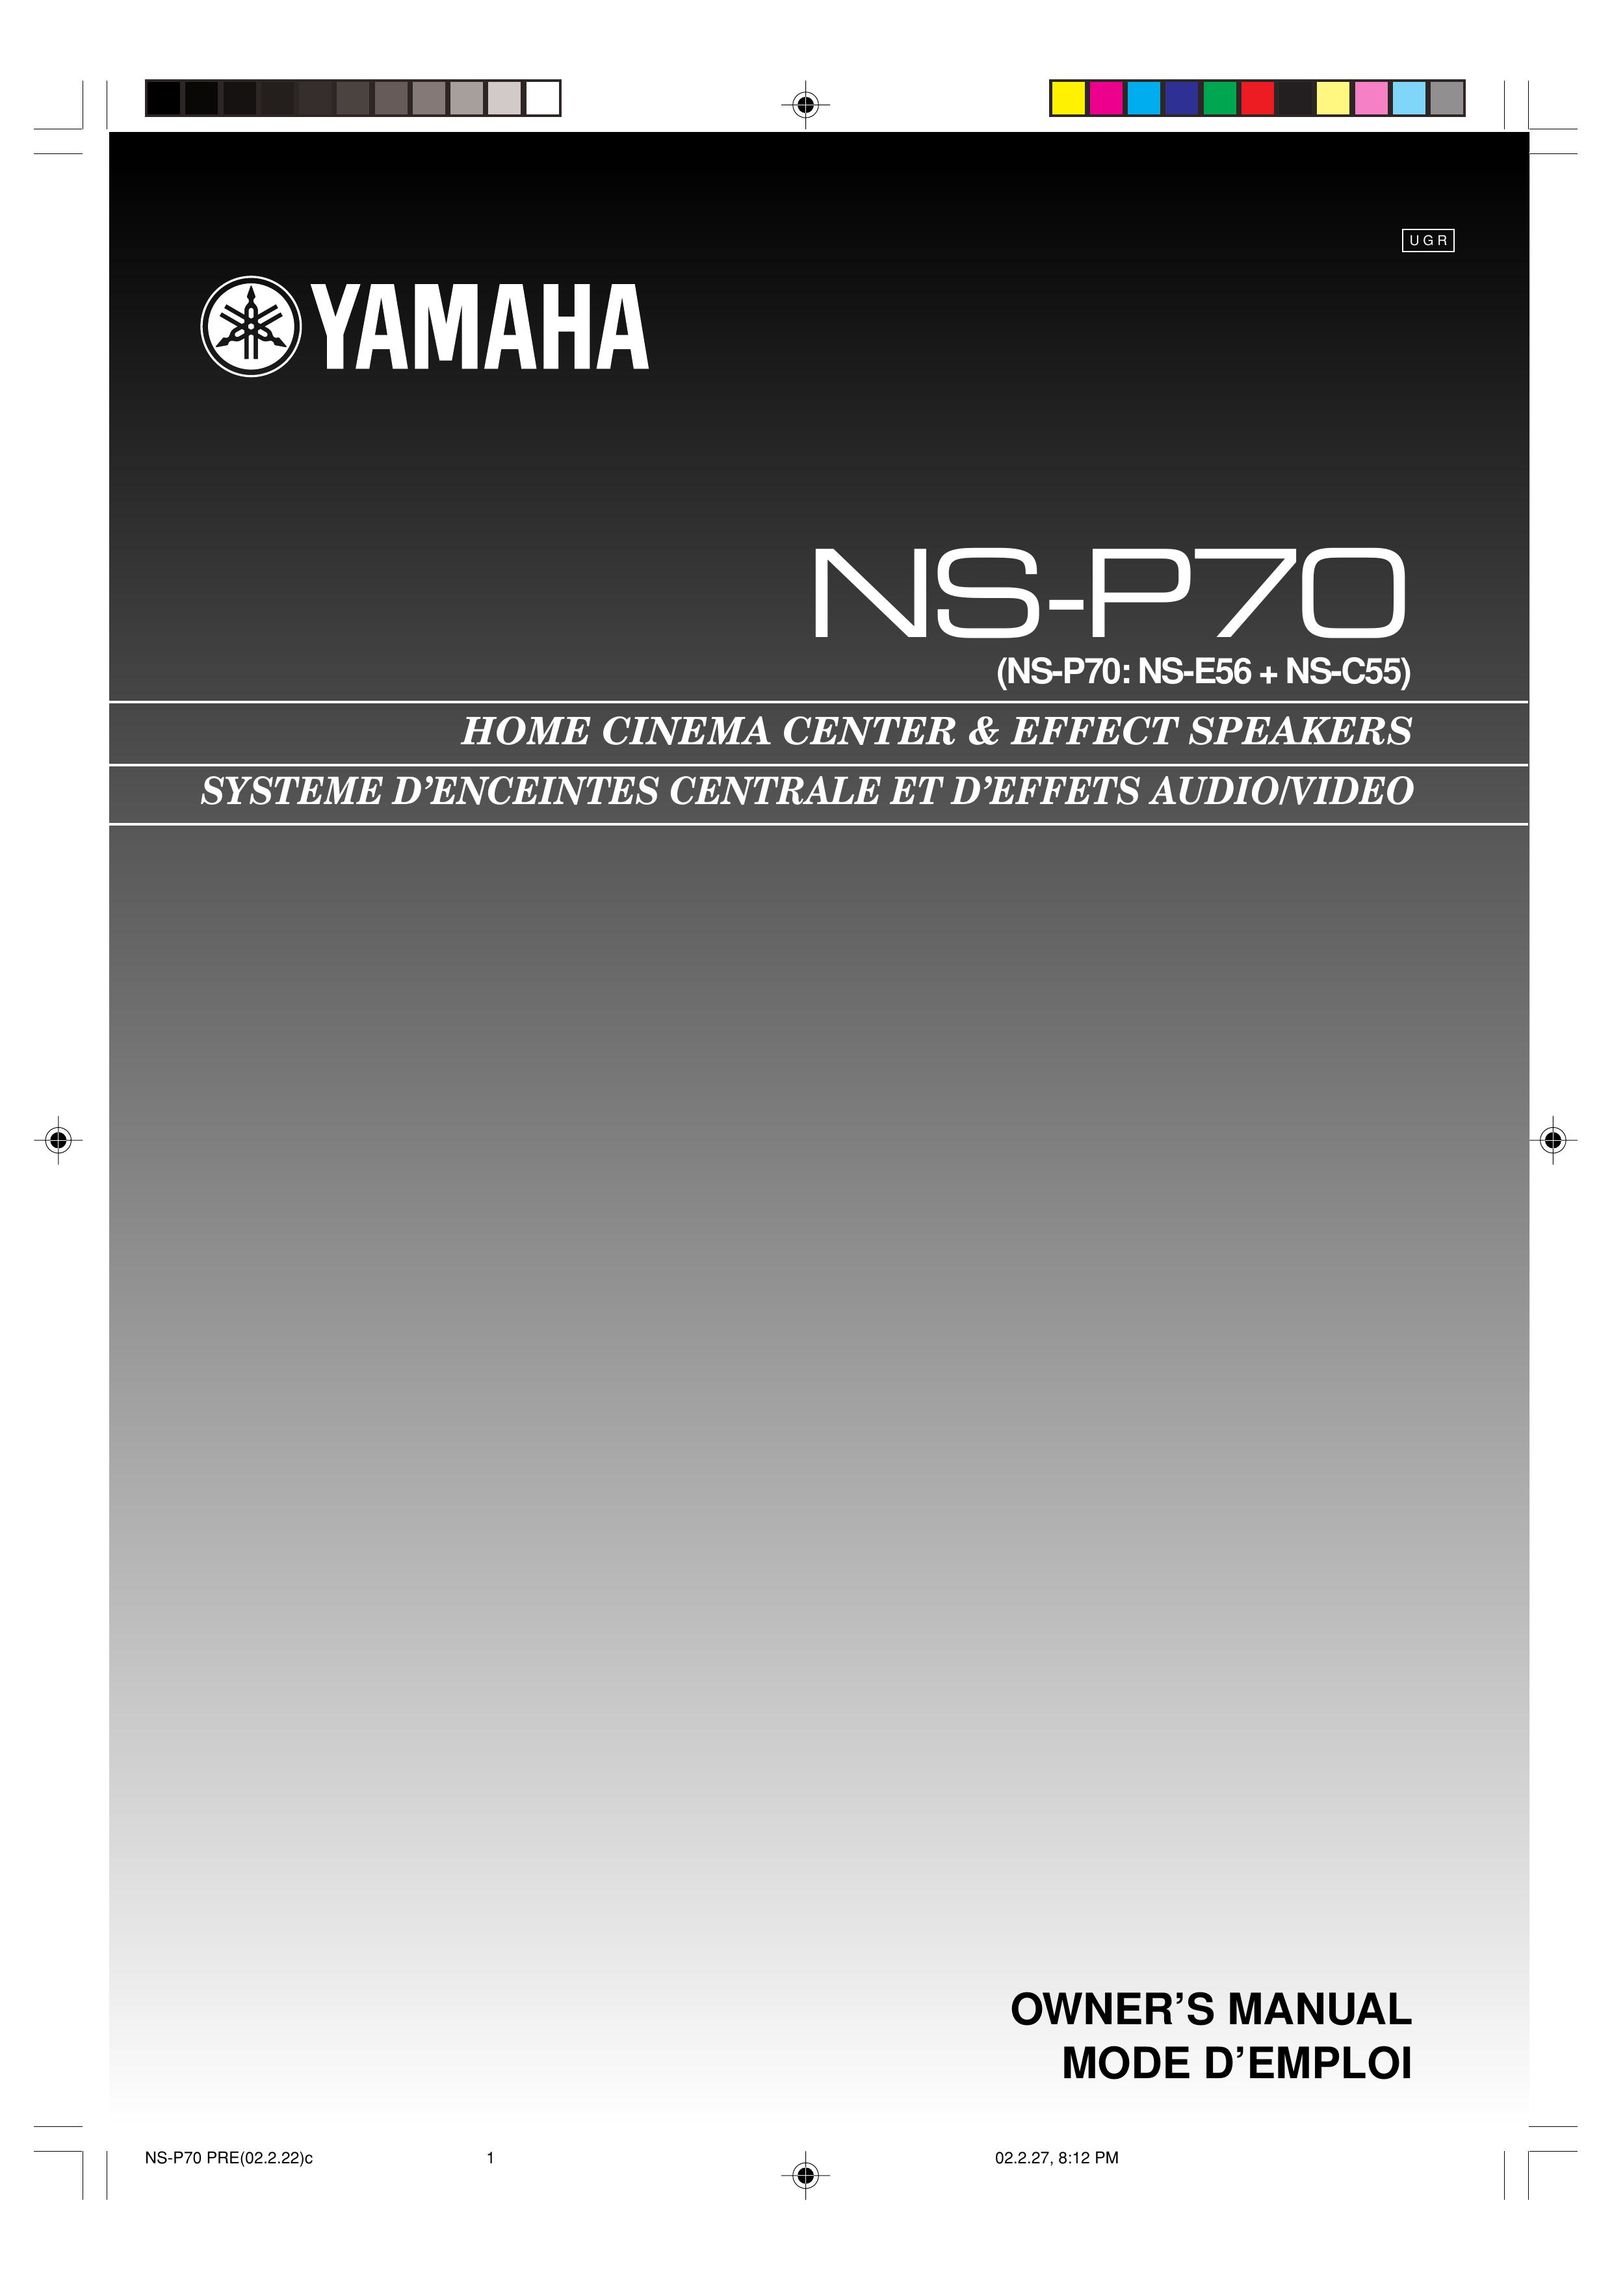 Yamaha NS-P70 Home Theater System User Manual